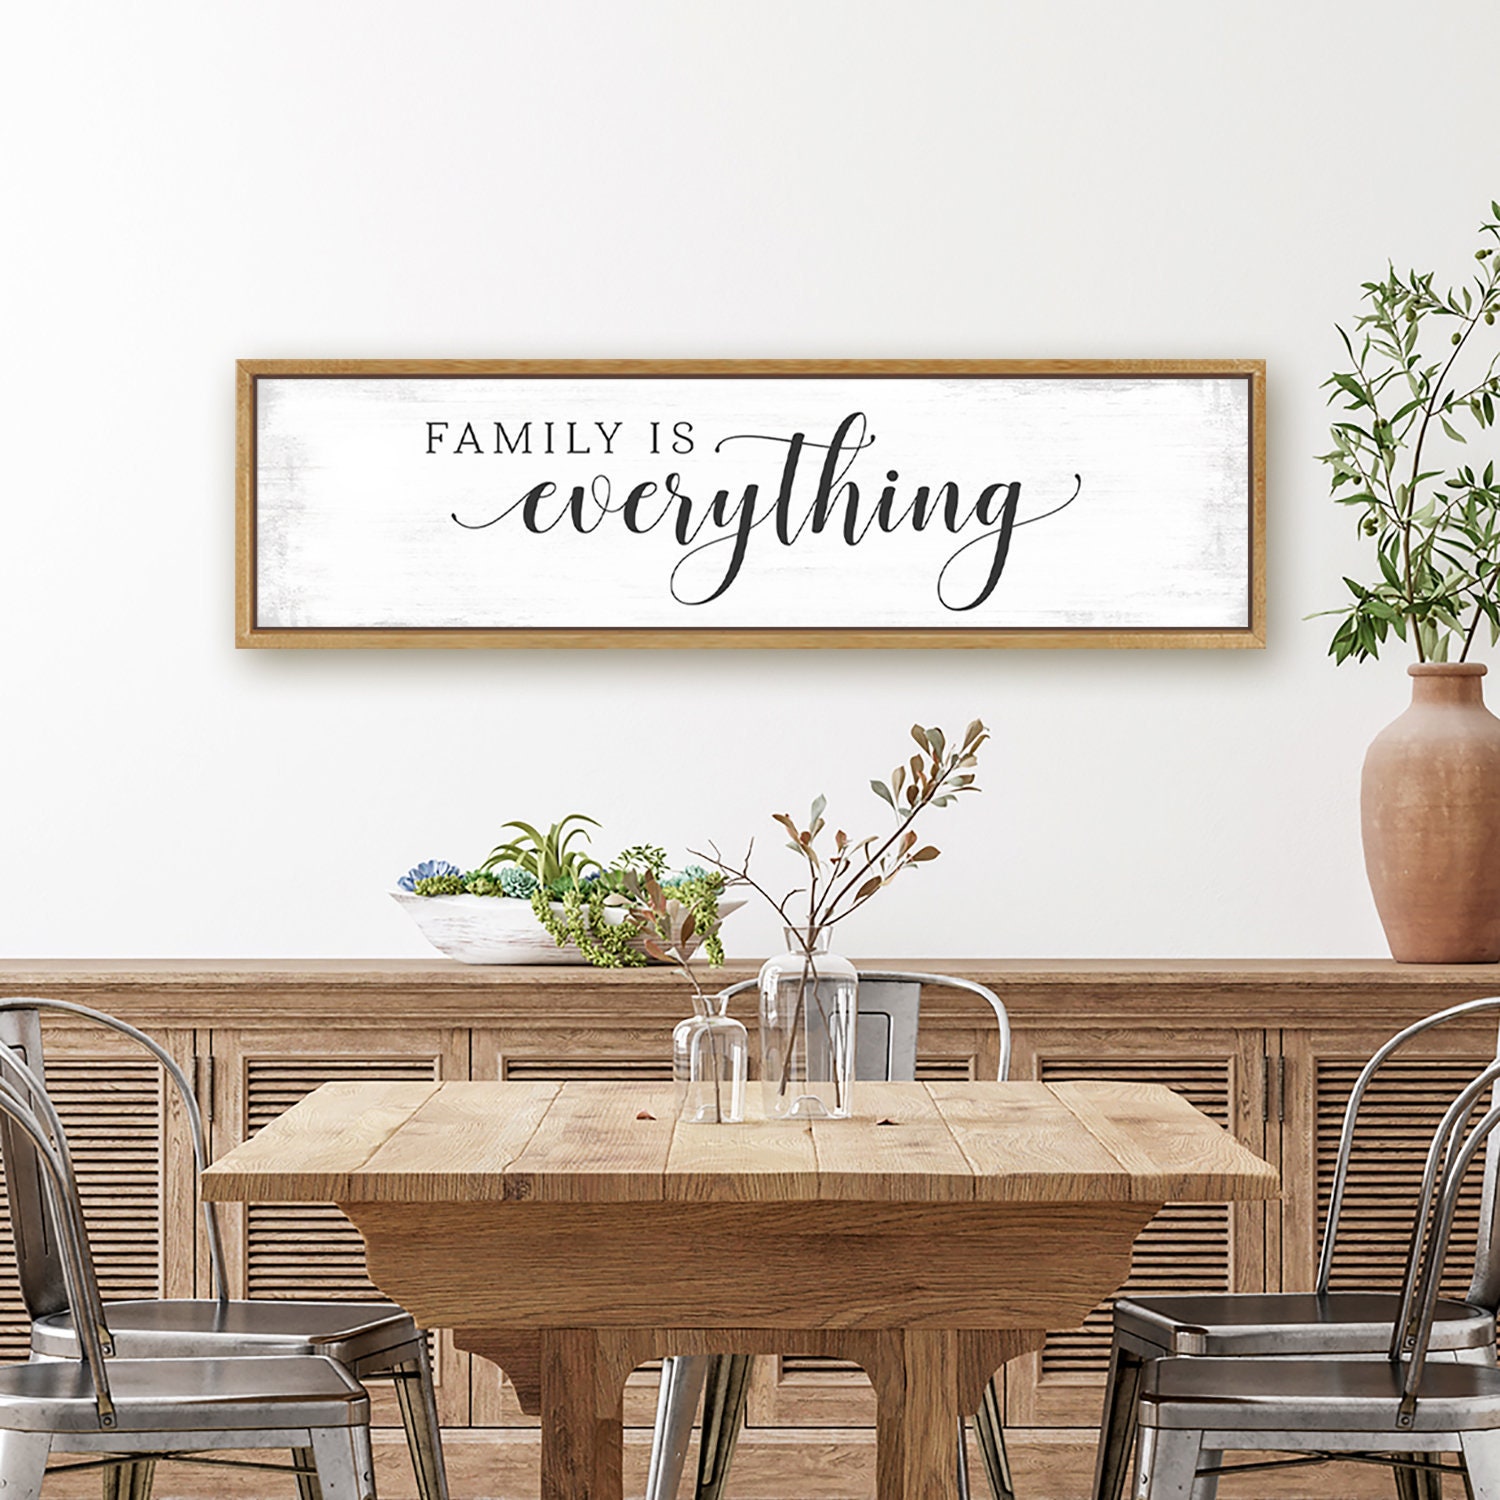  Family Definition Wooden Sign Inspiration Quotes Wall Art Sign  Dictionary Meaning Decorative Home Wall Art Primitive Wood Hanging Signs  for Laundry Room Home Kitchen Decoration Decor 16x16in : Home & Kitchen